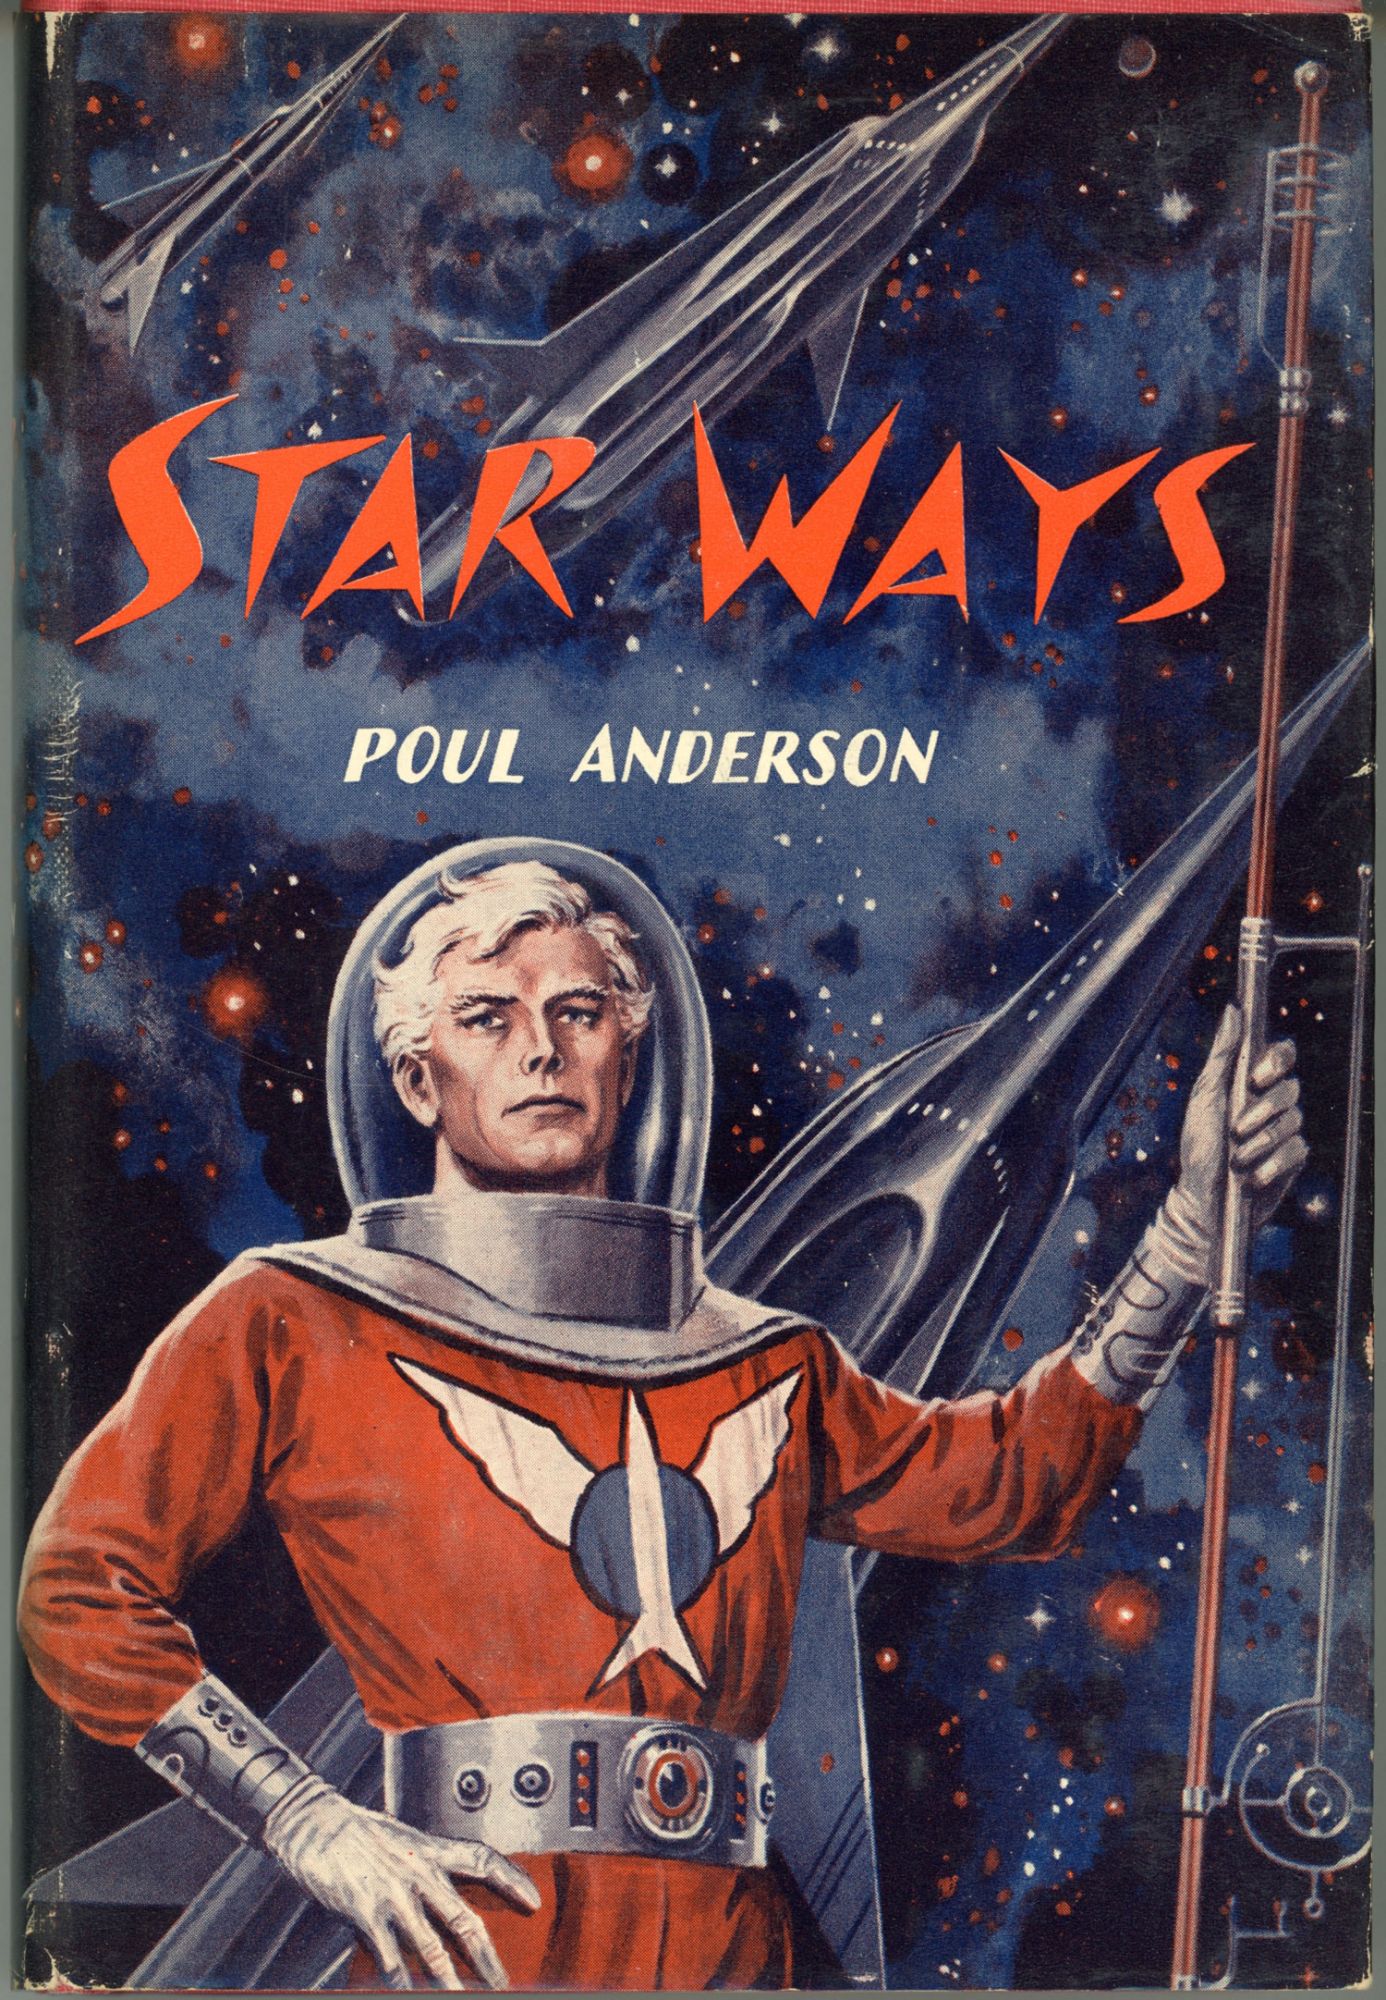 Image - cover of Star Ways by Poul Anderson